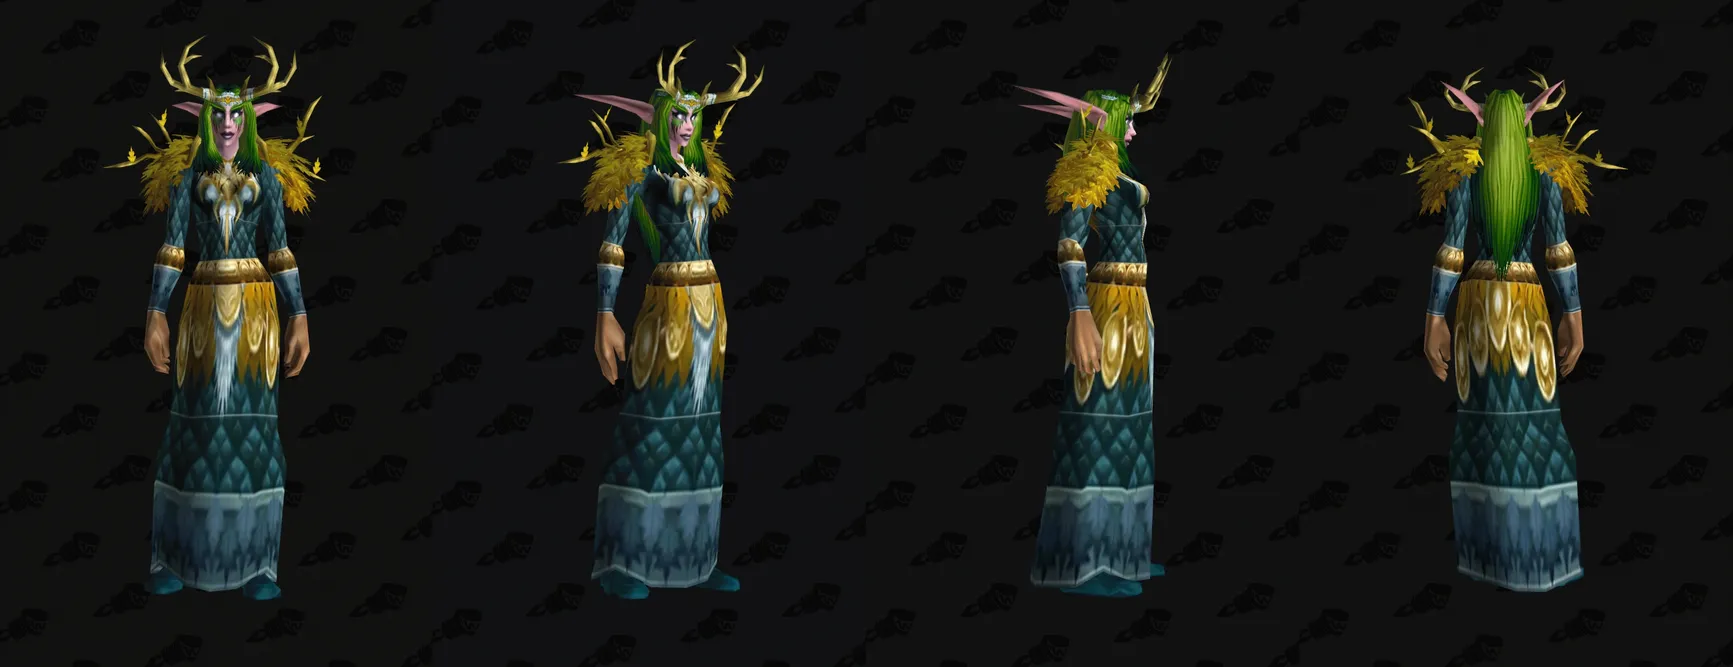 Cenarion Cunning WoW SoD Phase 4 Tier Set Recolor